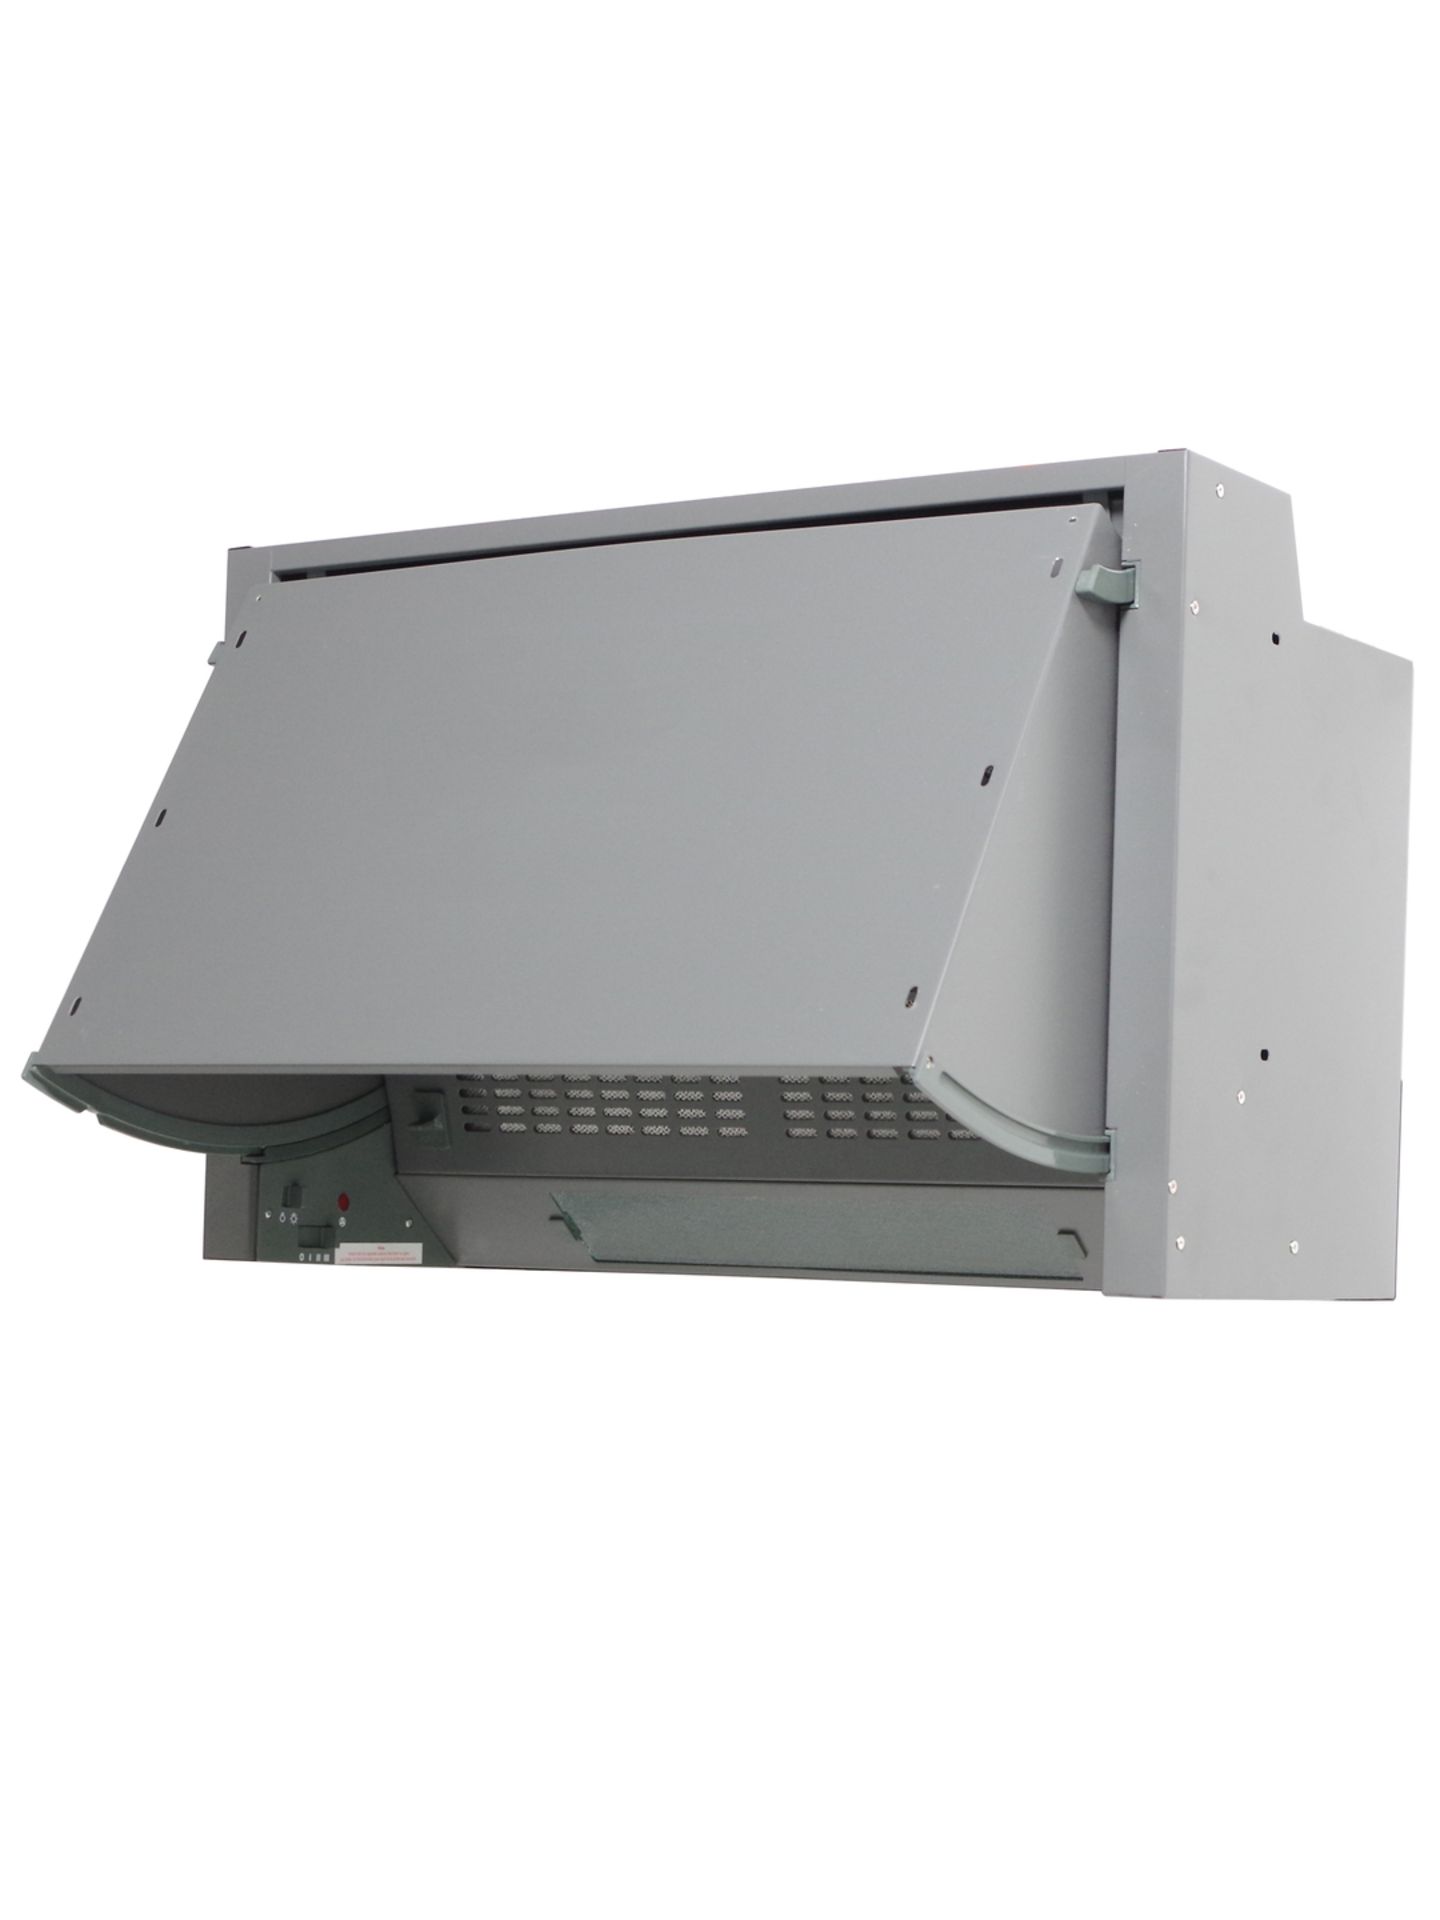 1 x BOXED INT60 60CM DELUXE INTEGRATED COOKER HOOD (05.10.17) *PLEASE NOTE THAT THE BID PRICE IS